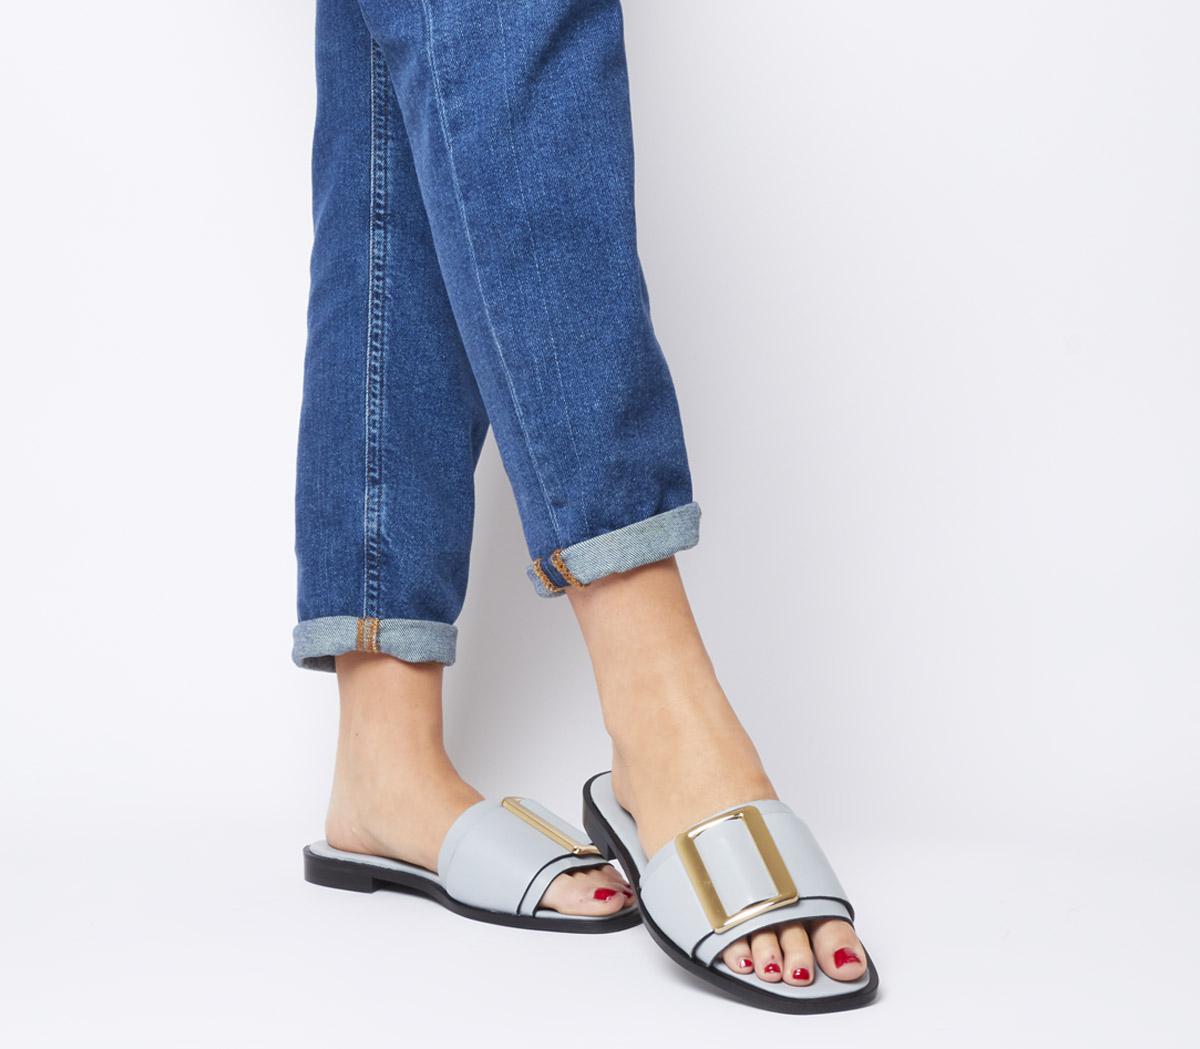 blue leather mules